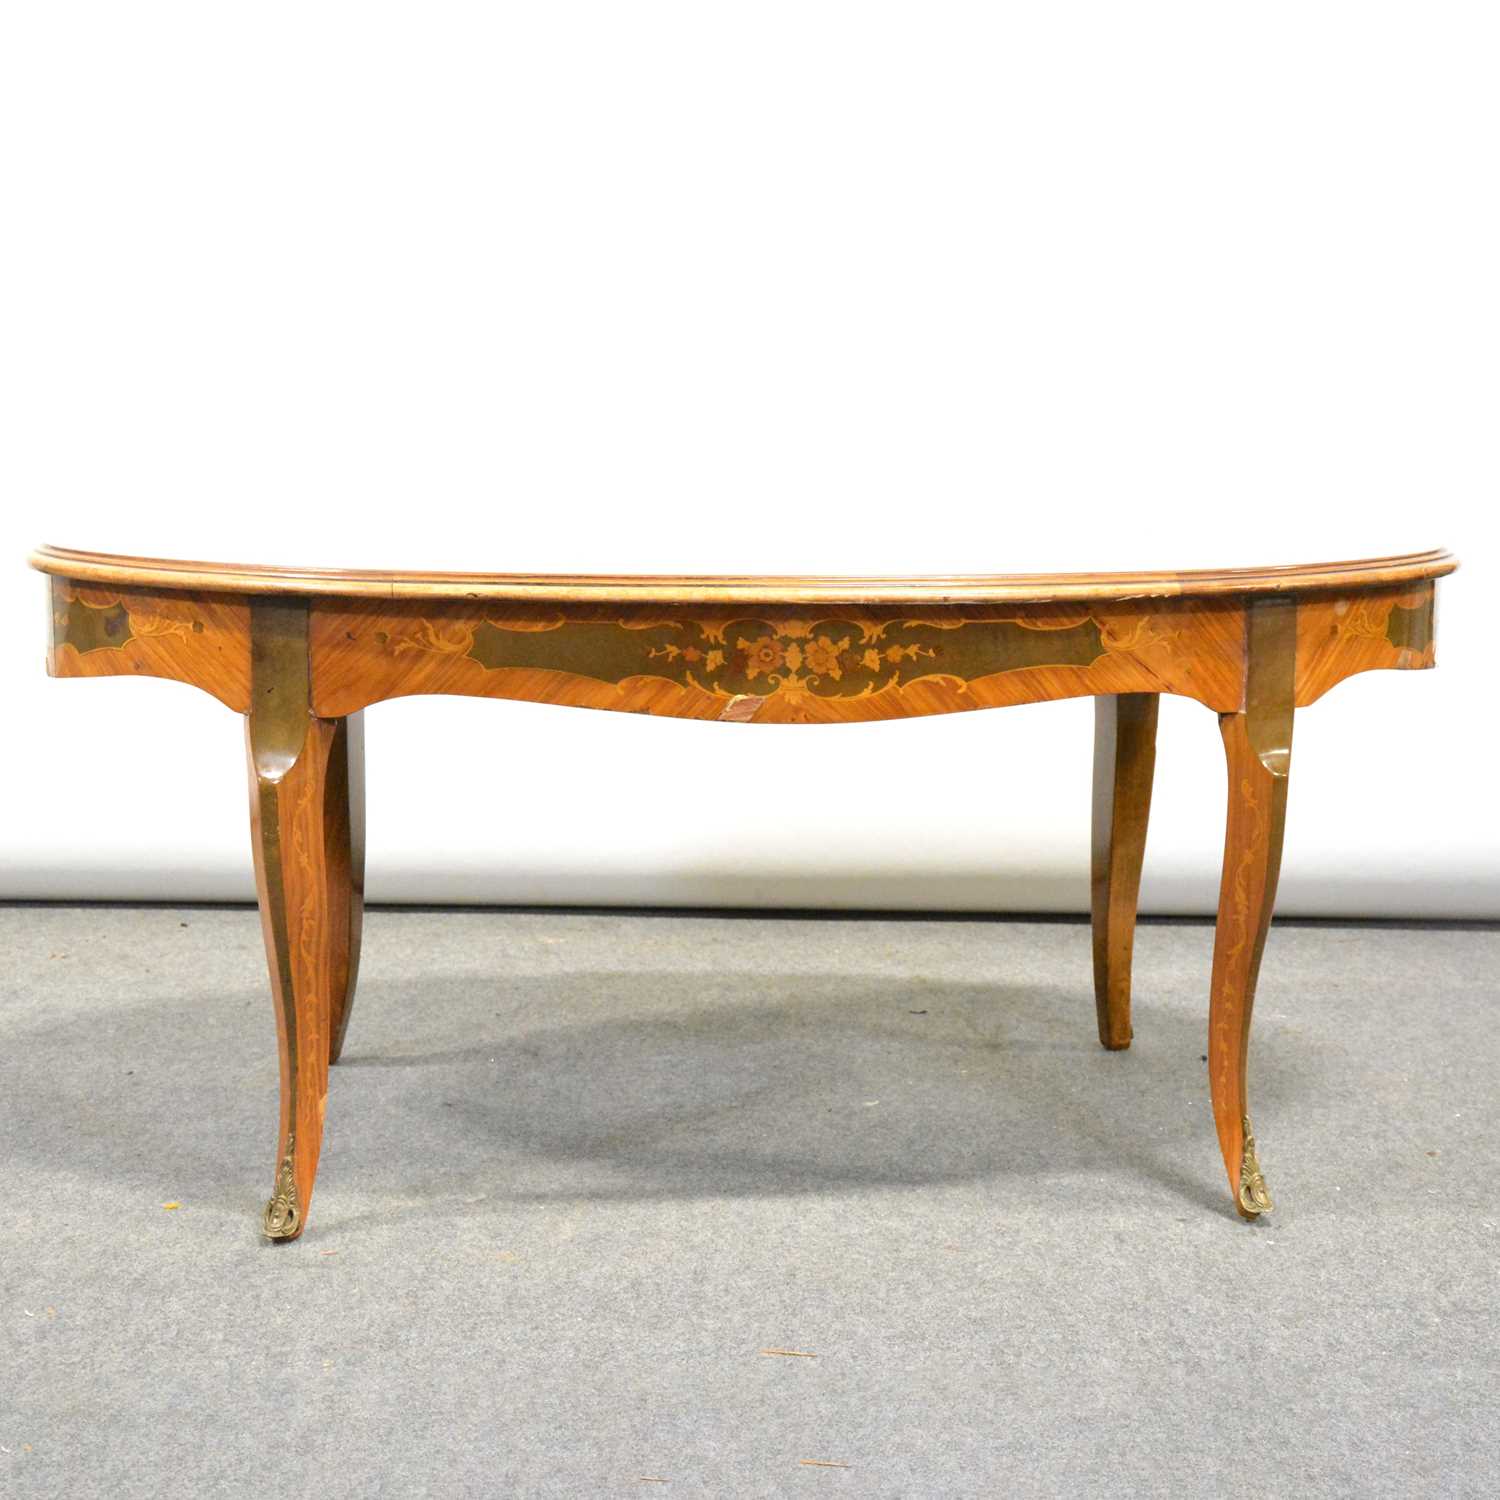 Lot 684 - Italian walnut and marquetry coffee table